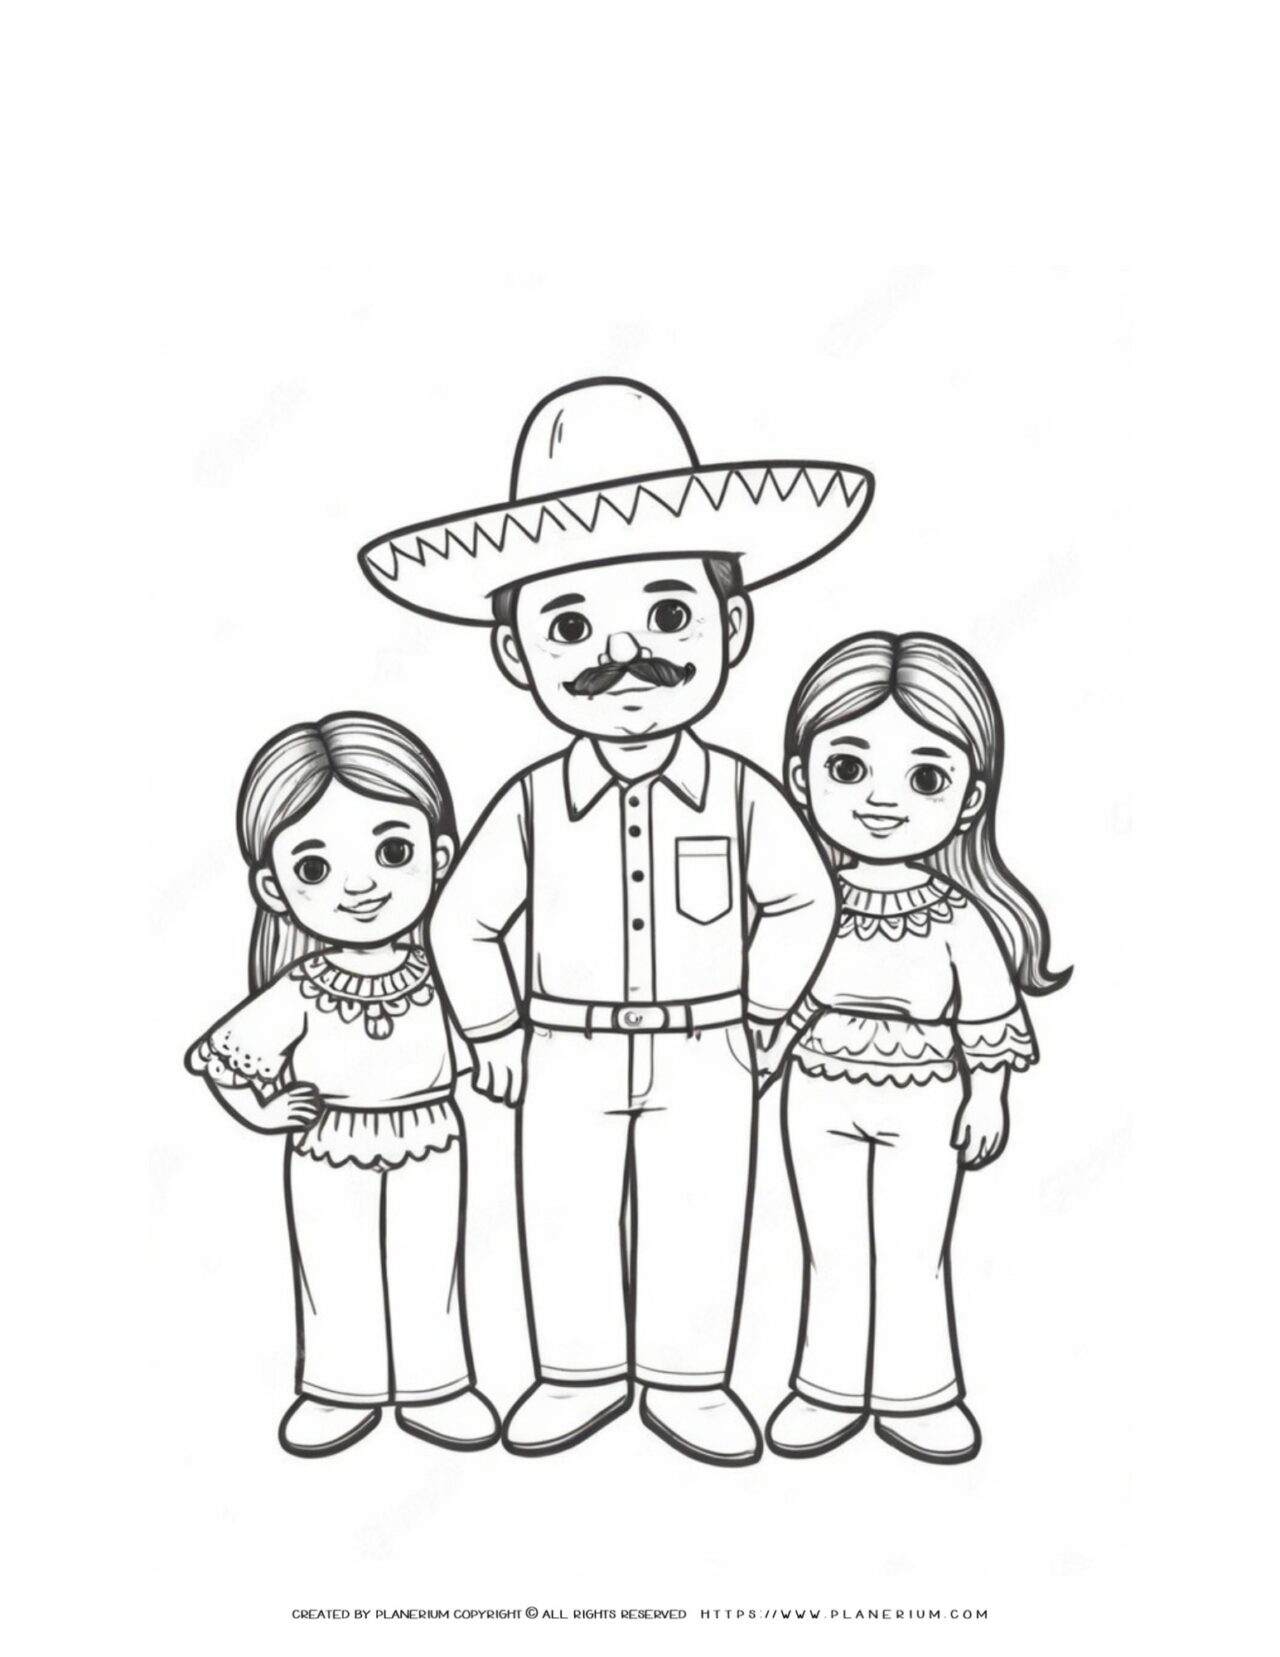 mexican-family-father-two-daughters-coloring-page-for-kids